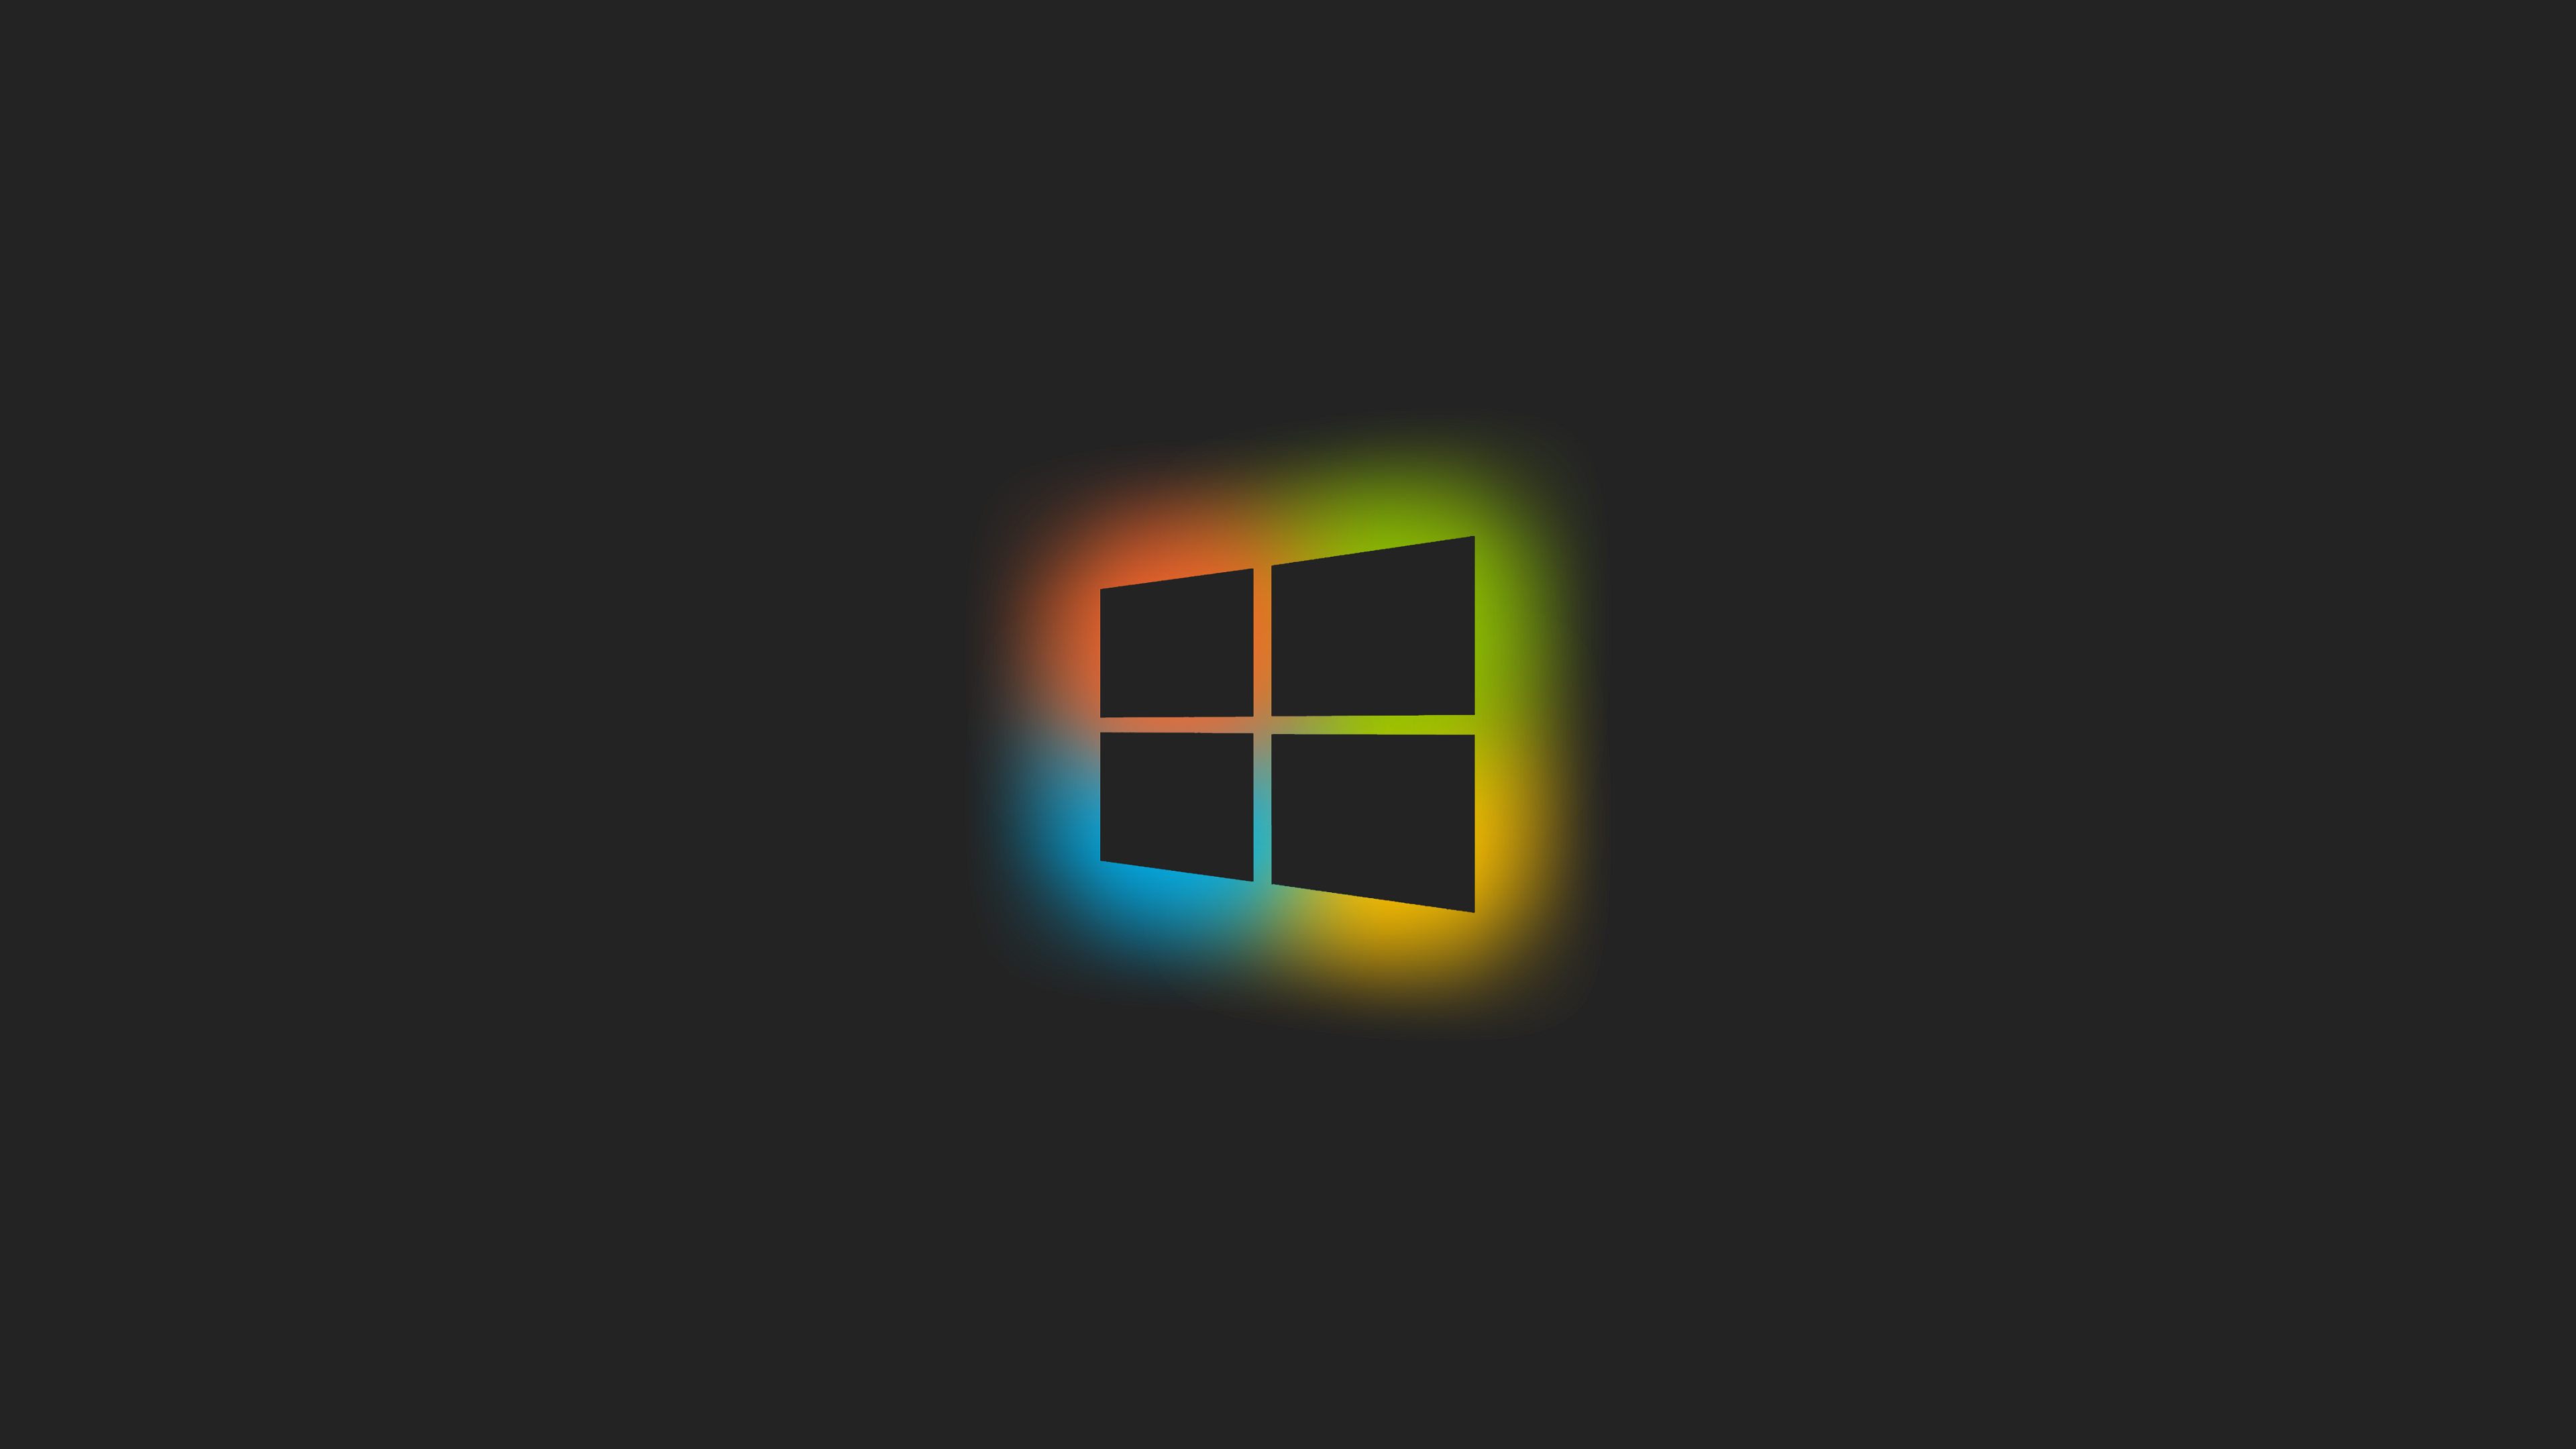 I redesigned a Windows background that I found online (changed the color from just yellow to the four basic colors of Windows) [3840x2160]